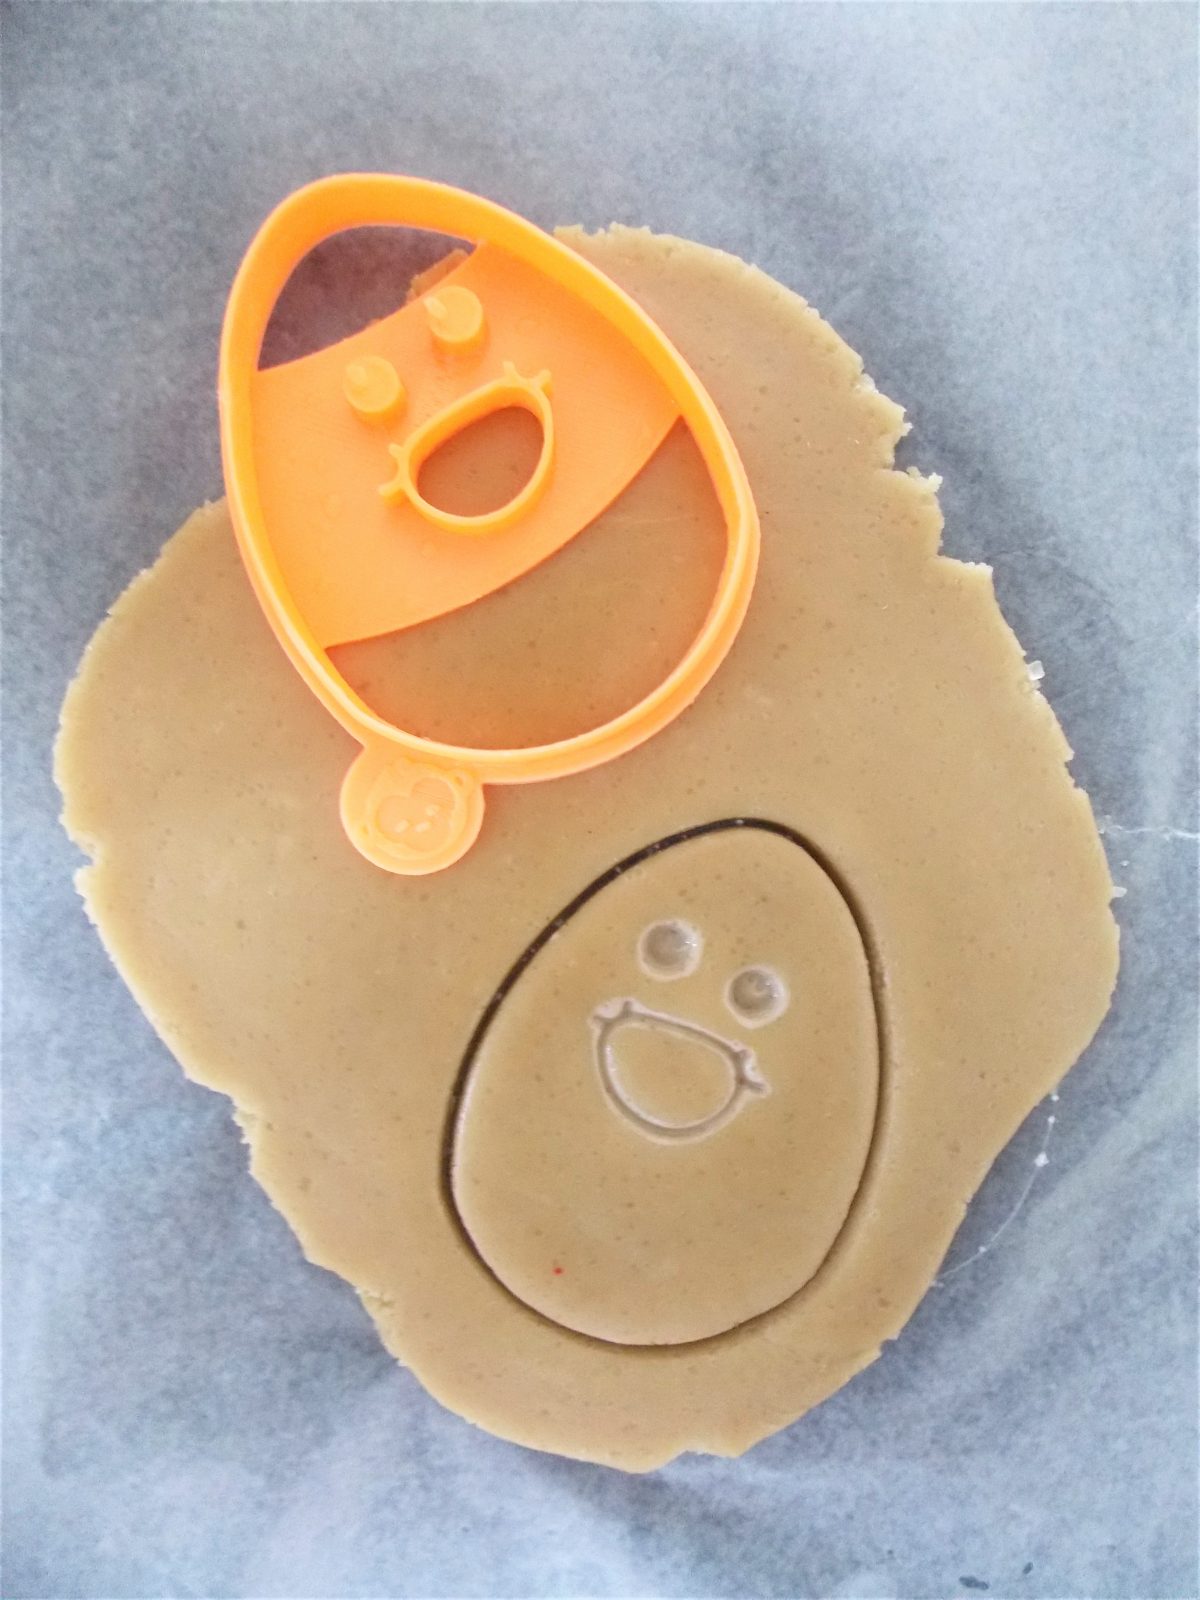 egg face three cookie cutter